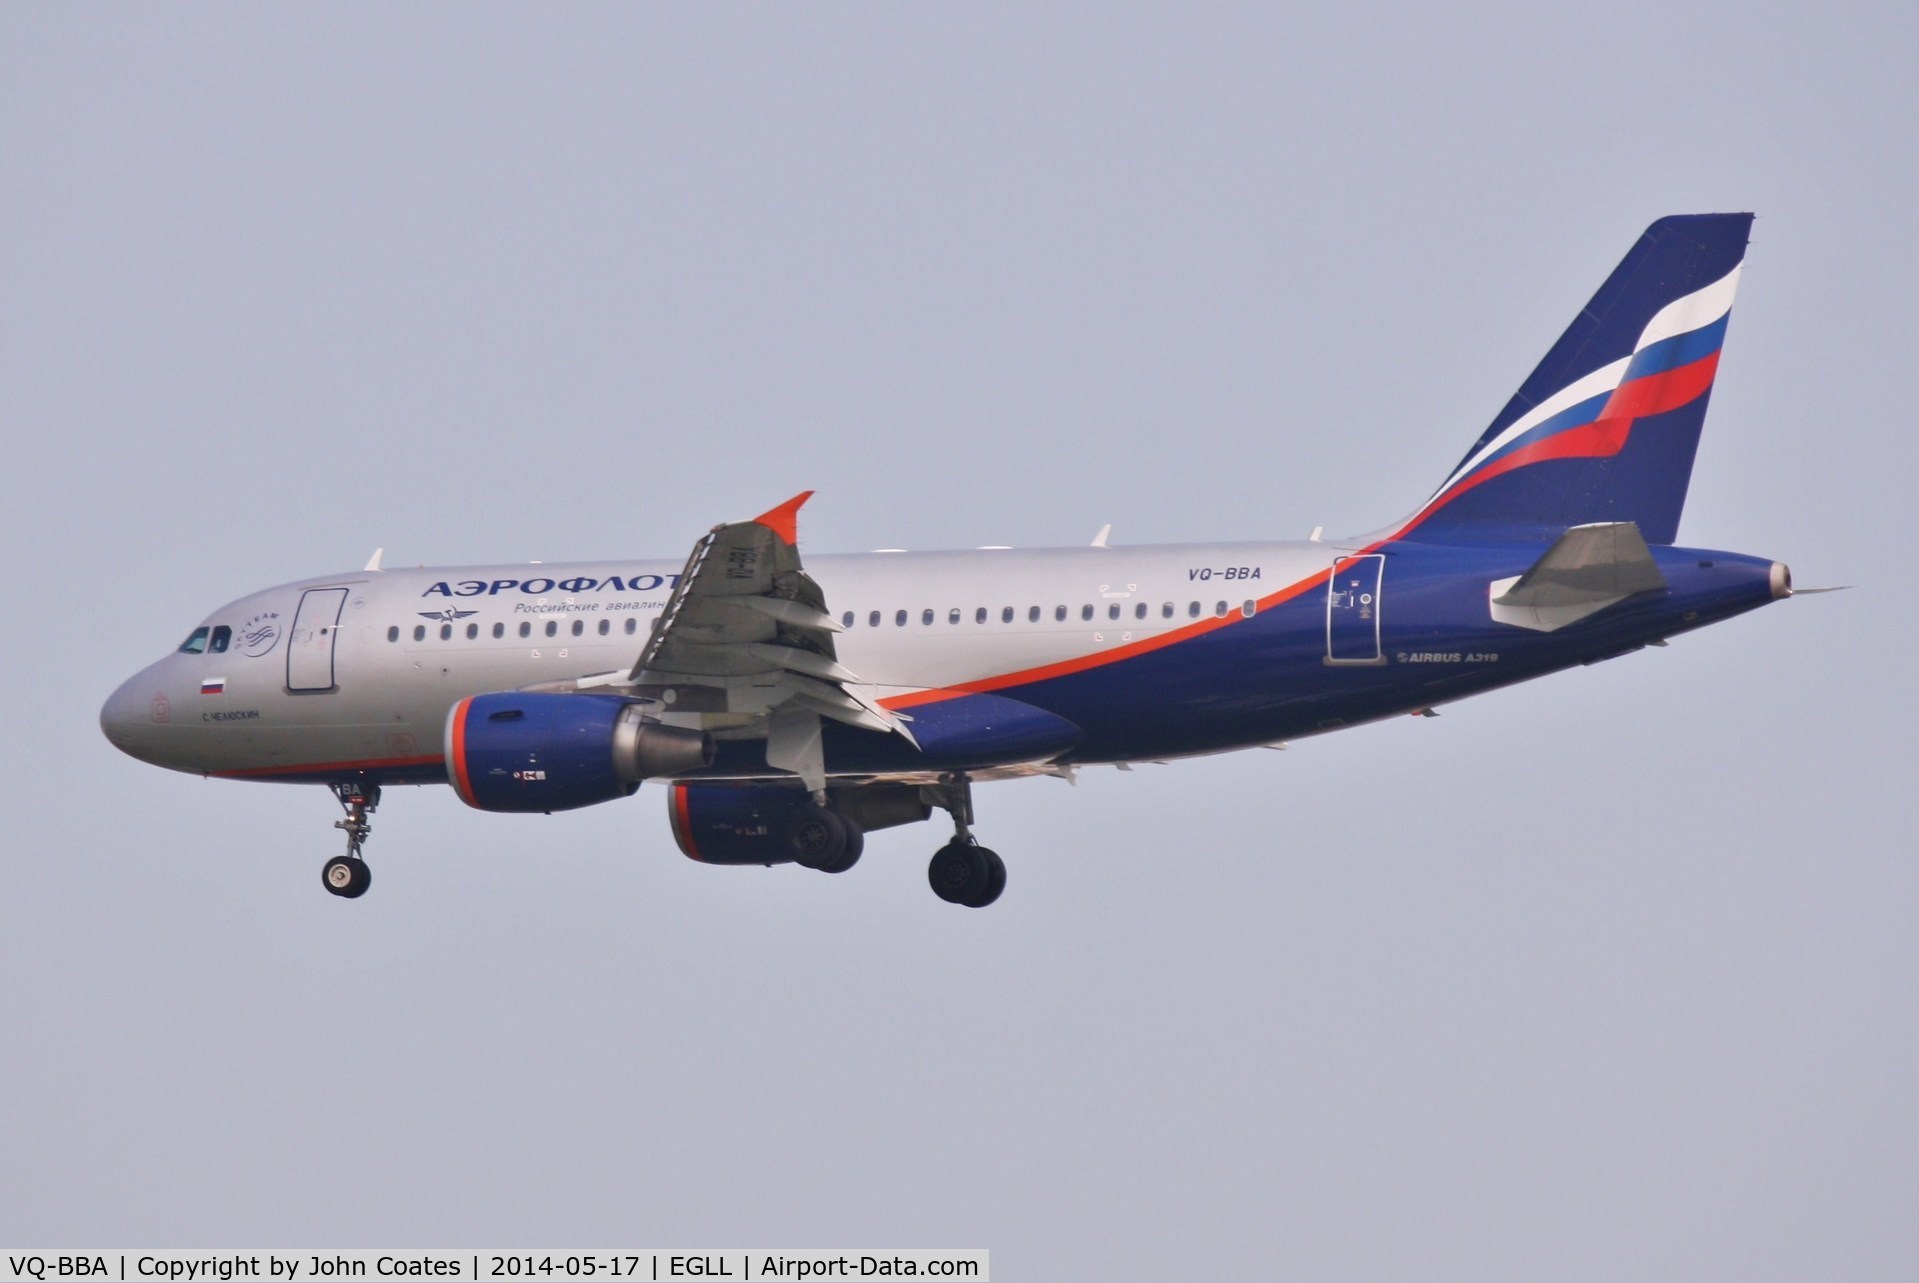 VQ-BBA, 2009 Airbus A319-112 C/N 3794, Arriving 27L